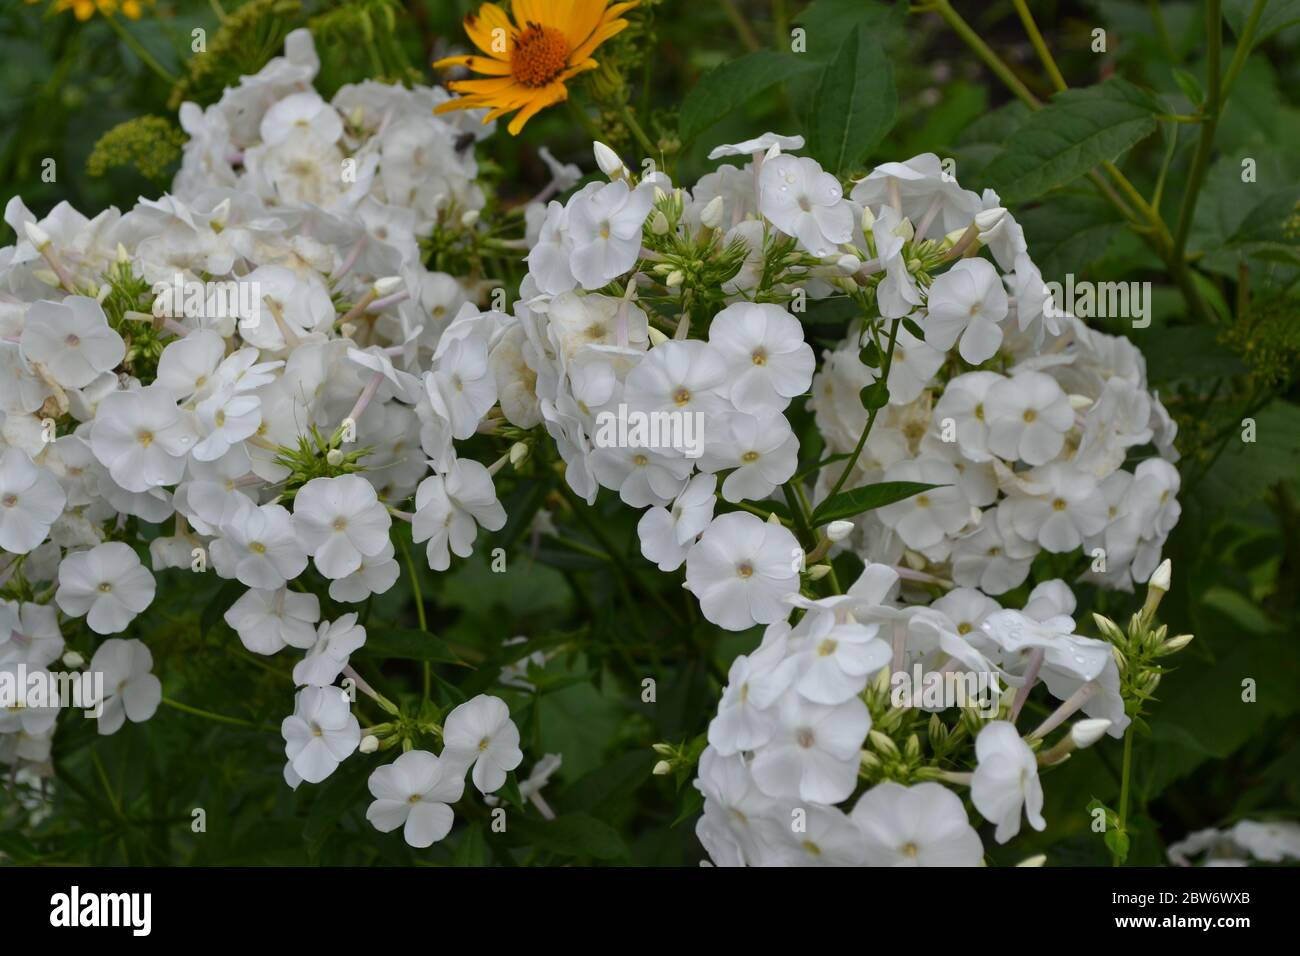 Gardening. Beautiful inflorescences. Phlox. Perennial herbaceous plant. High branches. White flowers Stock Photo